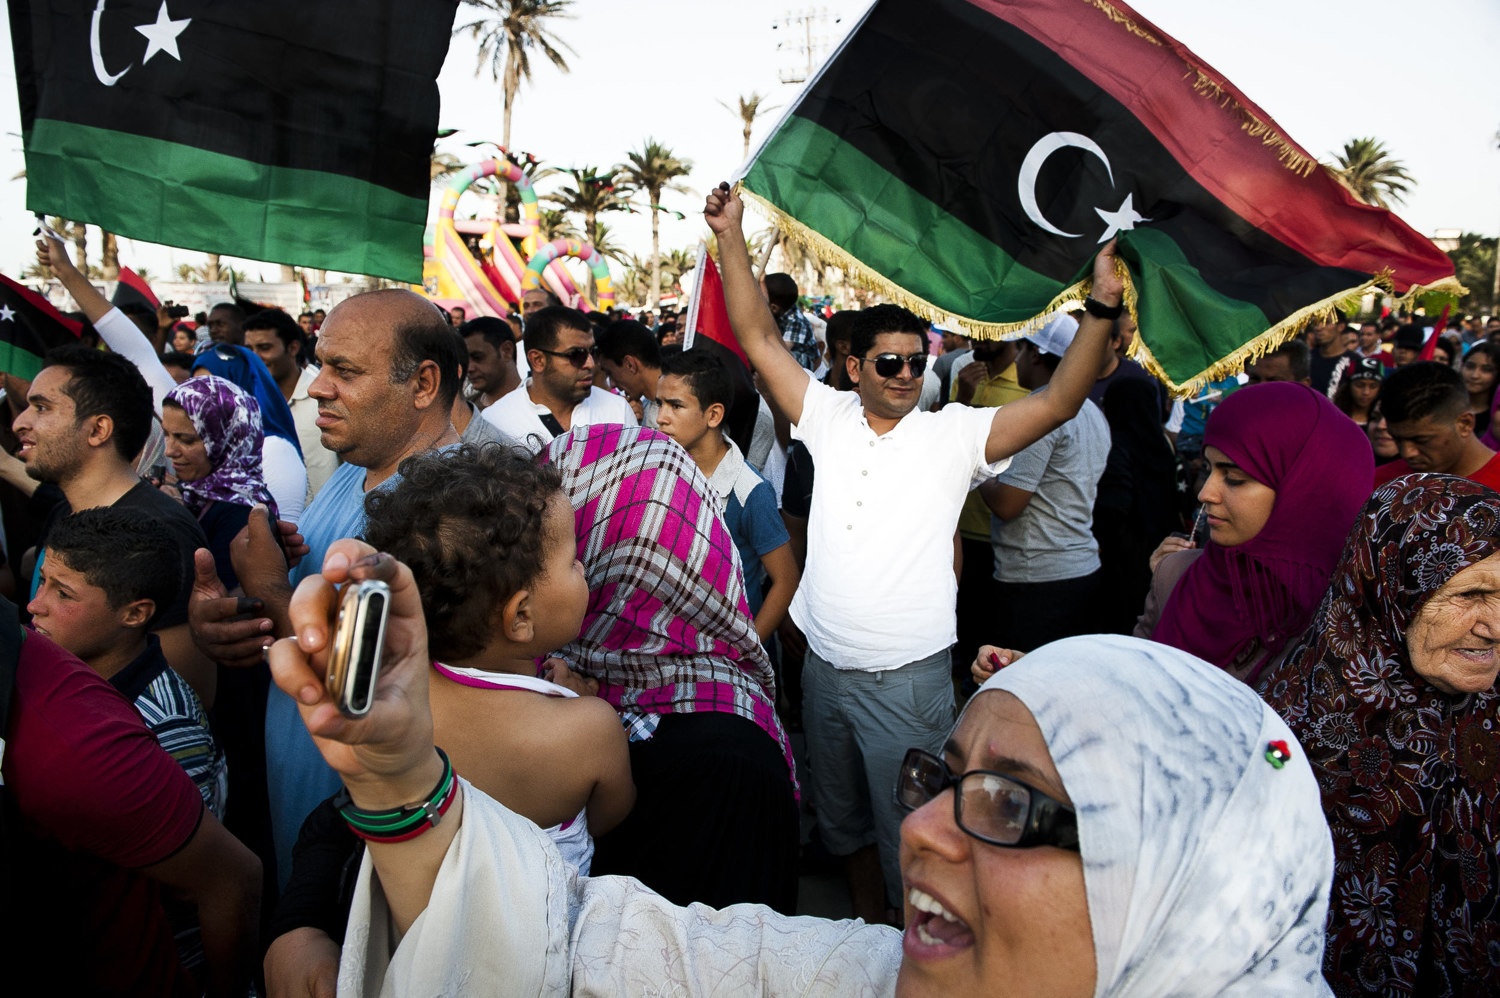  Libyans celebrate after voting. After 42 years of Muammar Gaddafi's reign, Libyans are participating in the first democratic election since 1969. Calls for boycott and election violence threatens the momentous day as campaigning drew to a close the 